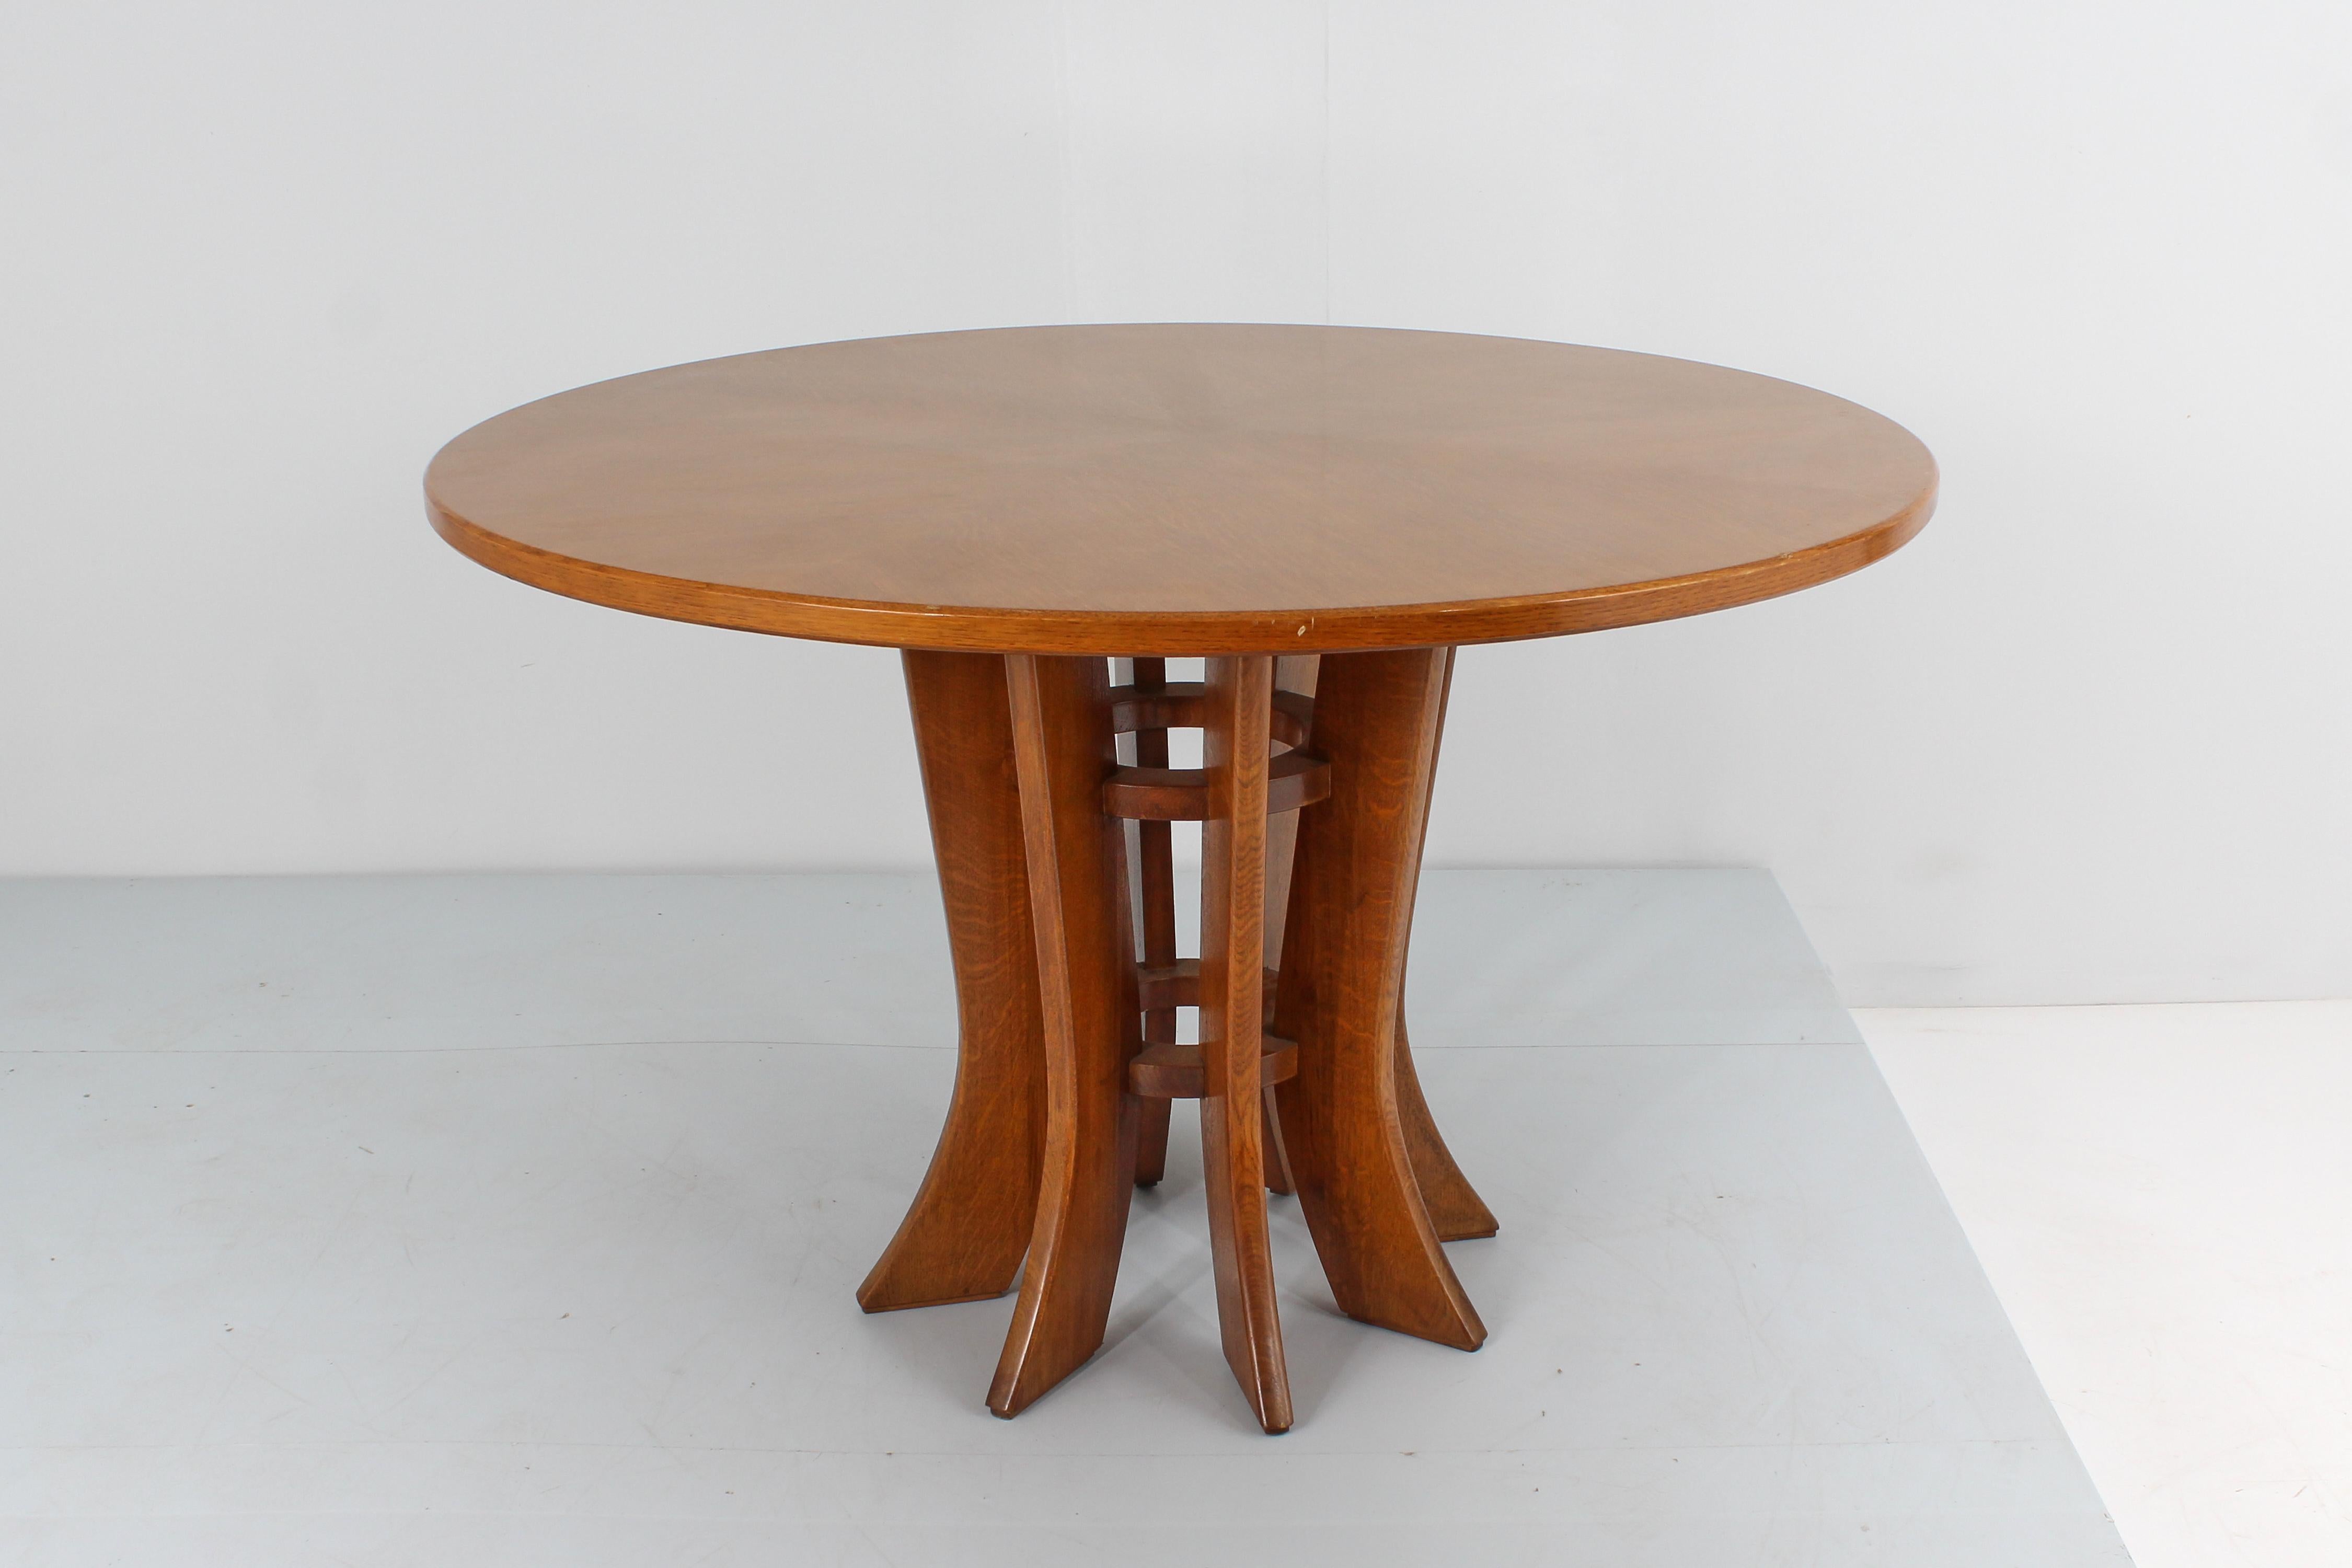 Beautiful round wooden dining table with an elegant central pedestal made up of shaped and rounded slats, positioned in a radial pattern, connected by two wooden ring bands, to create an open structure. In the style of Angelo Mangiarotti, Italian